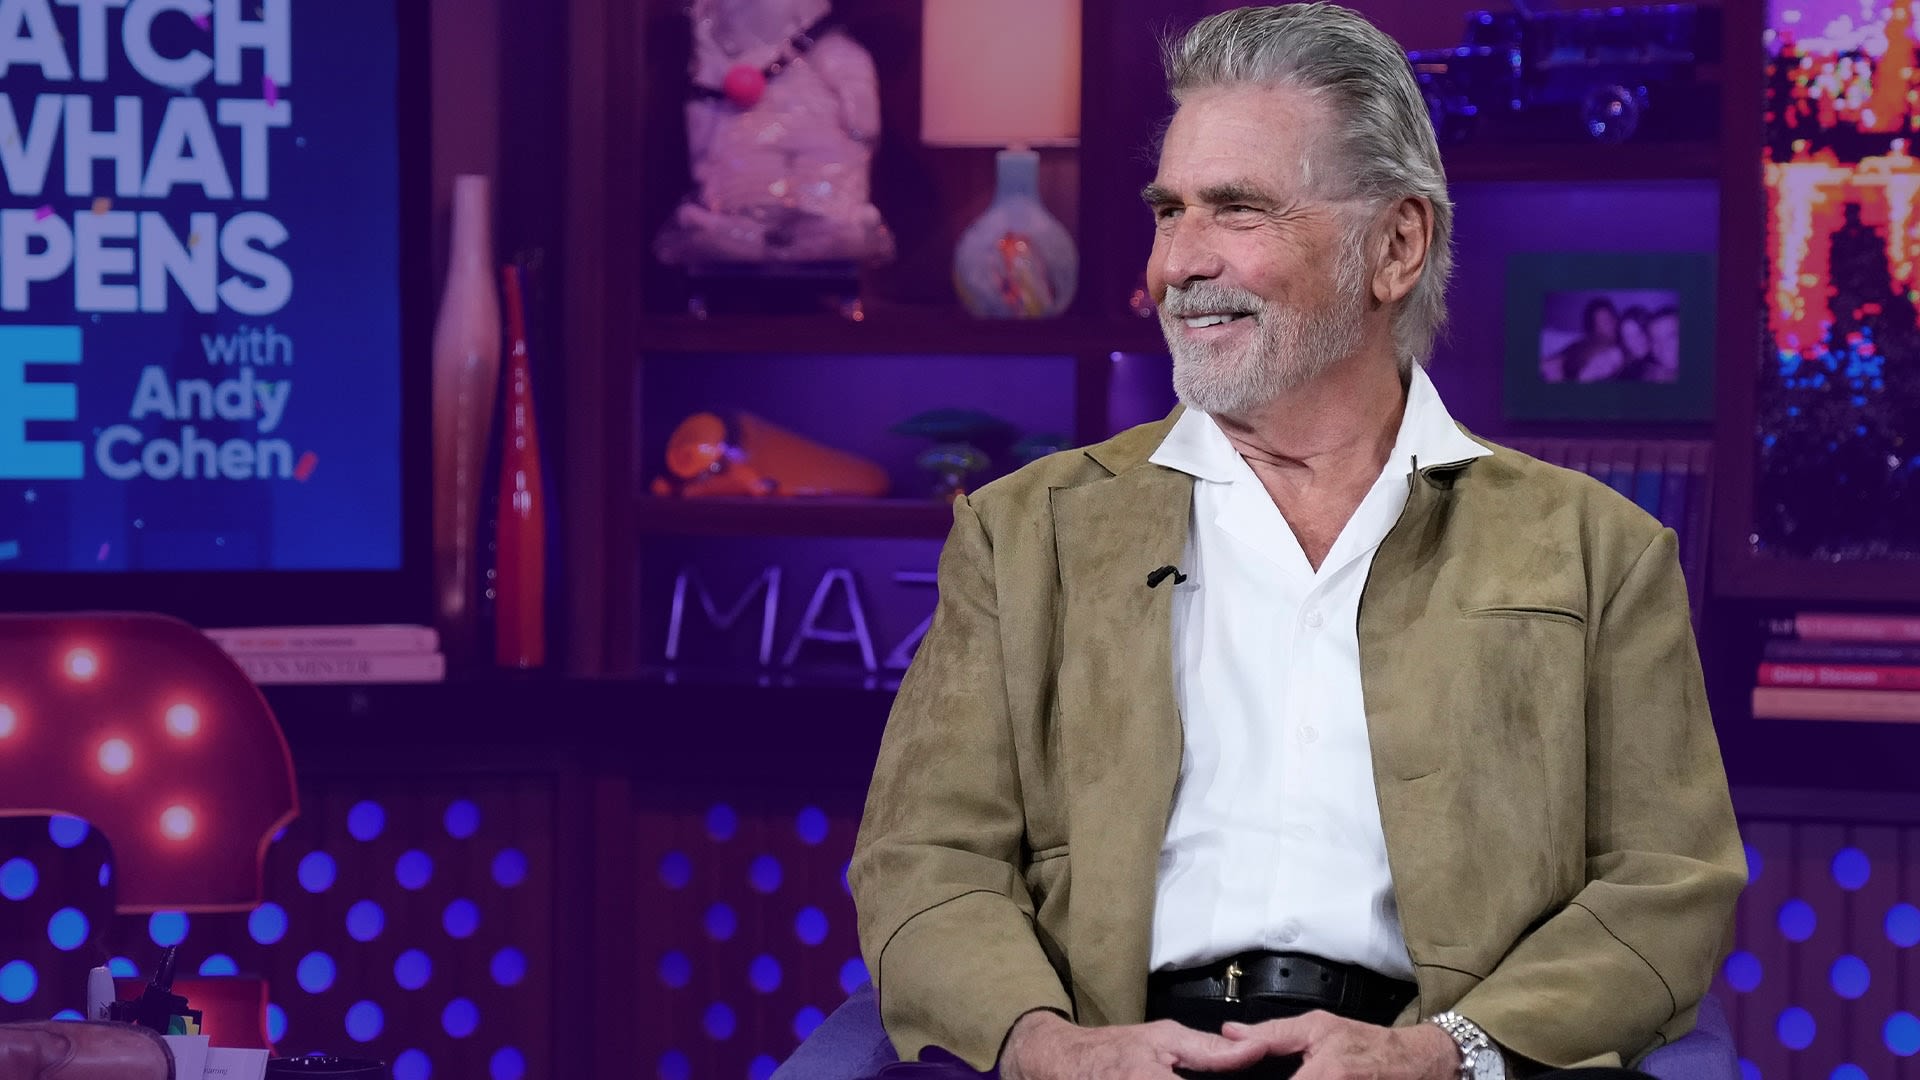 James Brolin Says He Wanted Barbra Streisand After Seeing Her In "Nuts" | Bravo TV Official Site